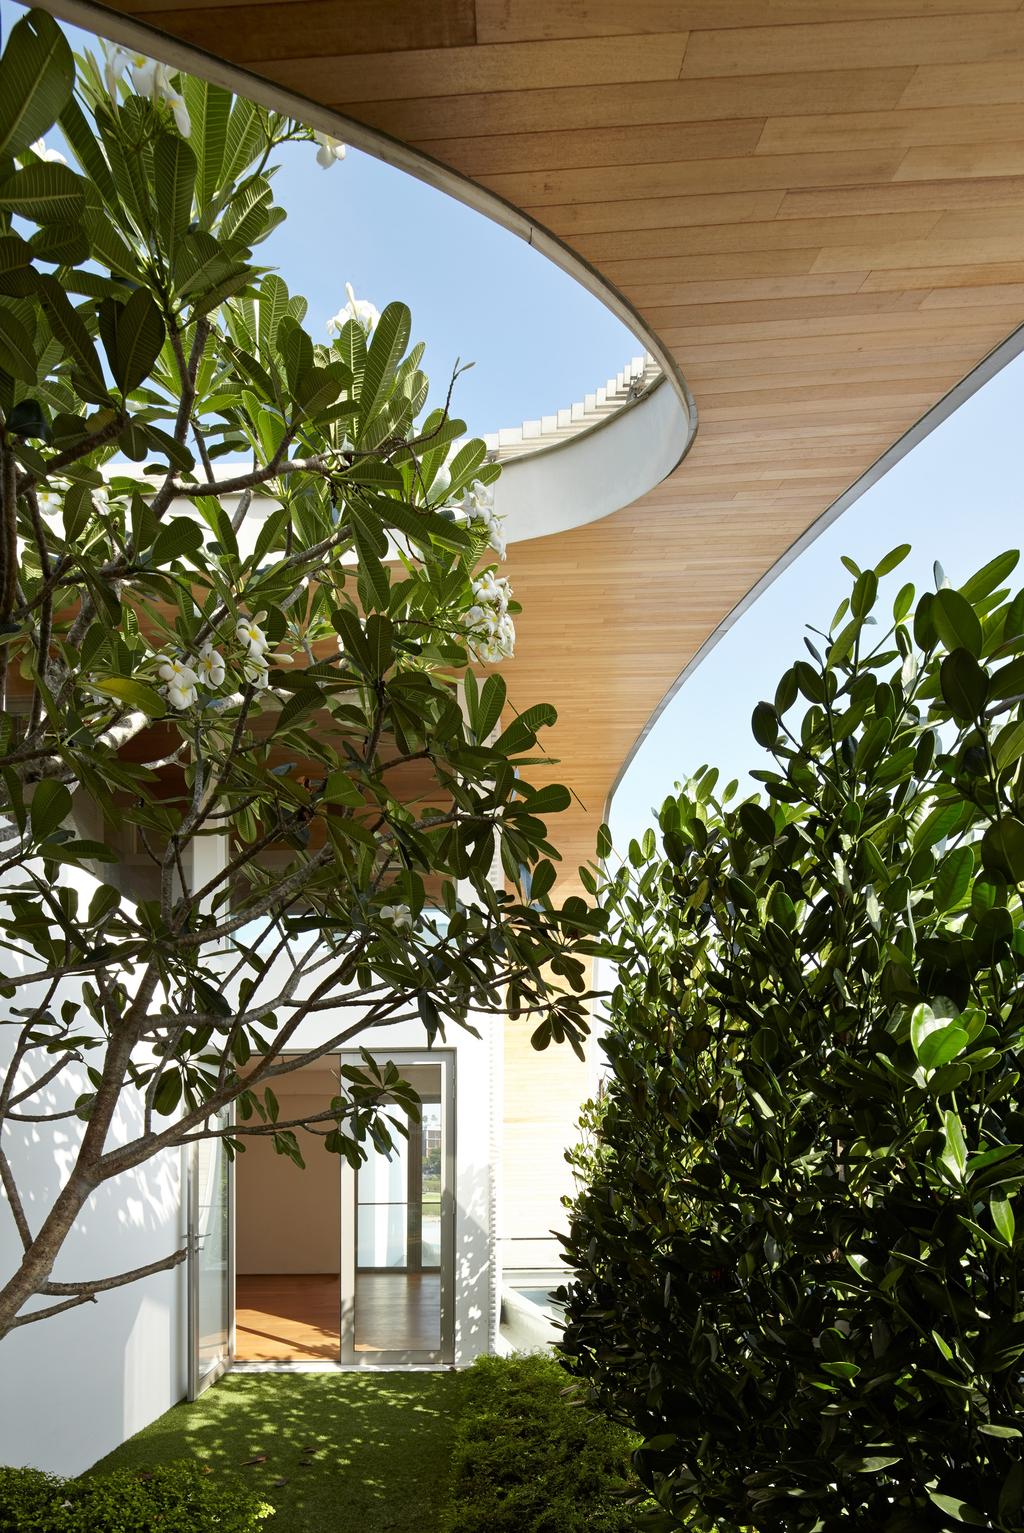 Modern, Landed, Cove Drive 2, Architect, Greg Shand Architects, Open Roof, Planted Trees, Wood Ceiling, Flora, Jar, Plant, Potted Plant, Pottery, Vase, Herbs, Parsley, Planter